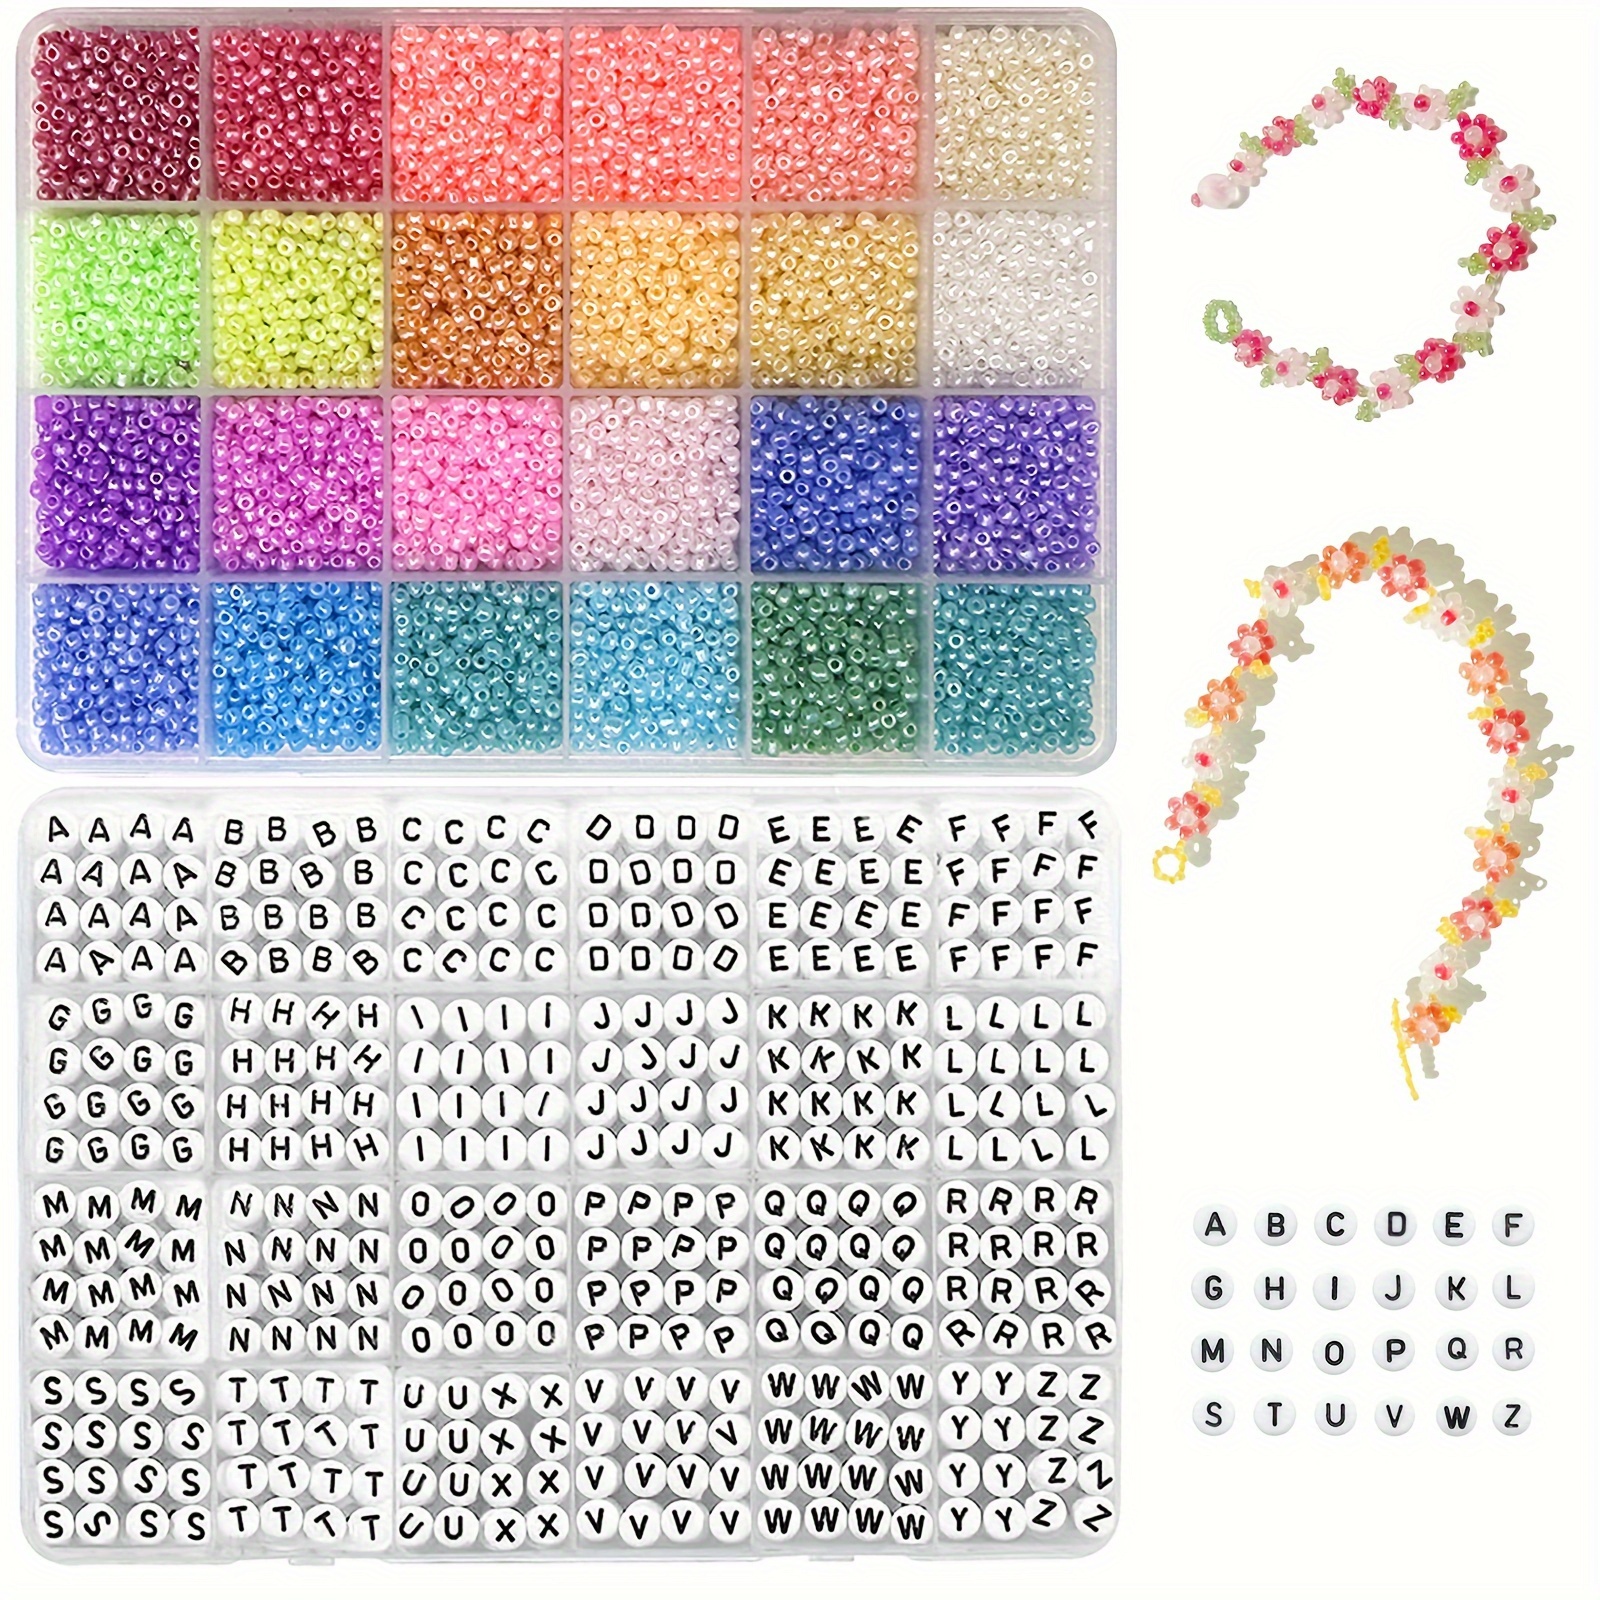  KOTHER 15000+pcs 4mm Seed Beads for Jewelry Making Kit